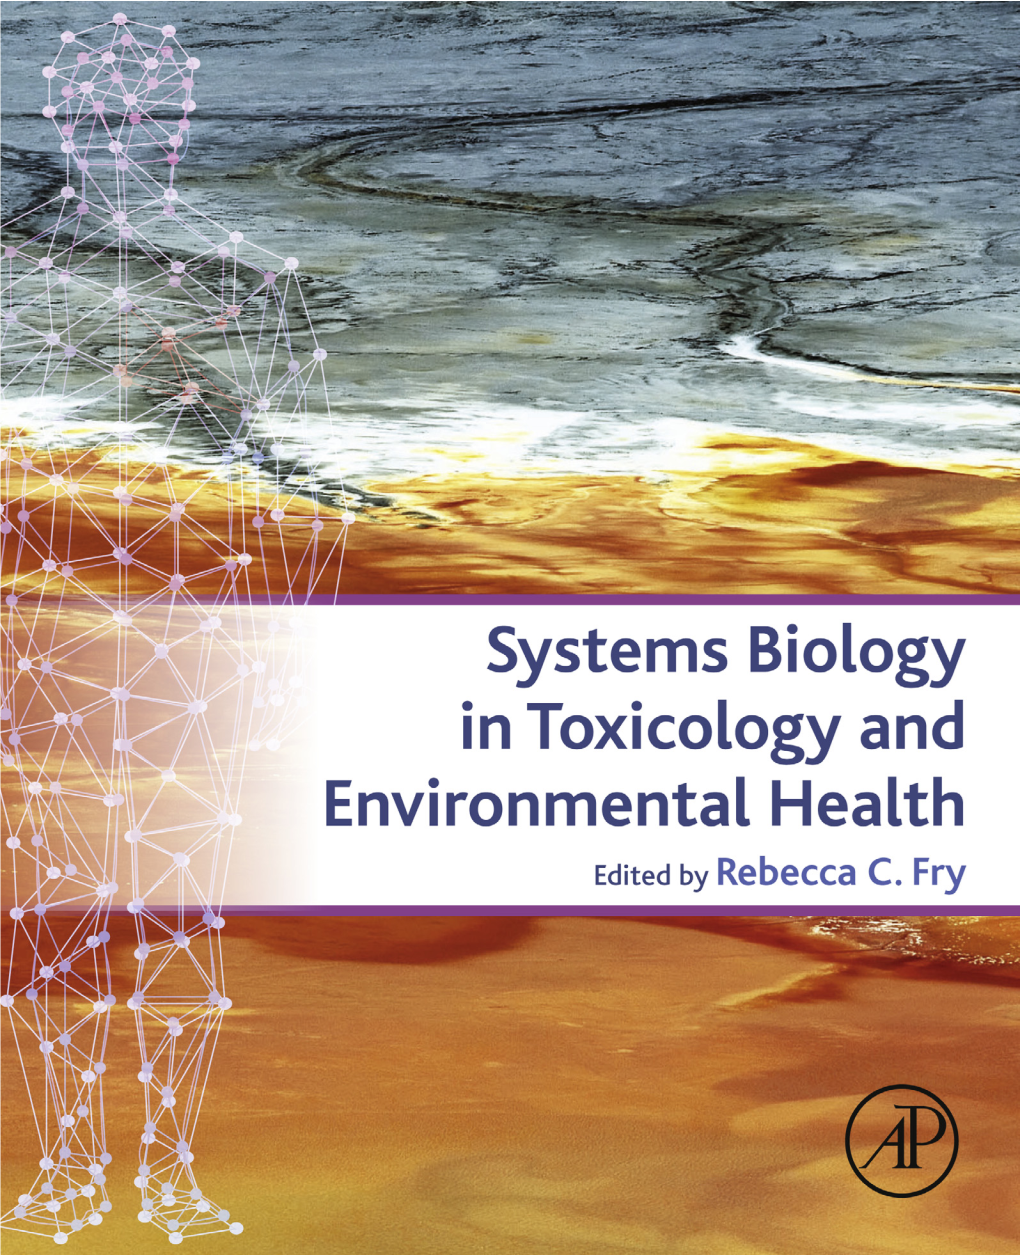 Systems Biology in Toxicology and Environmental Health Copyright © 2015 Elsevier Inc